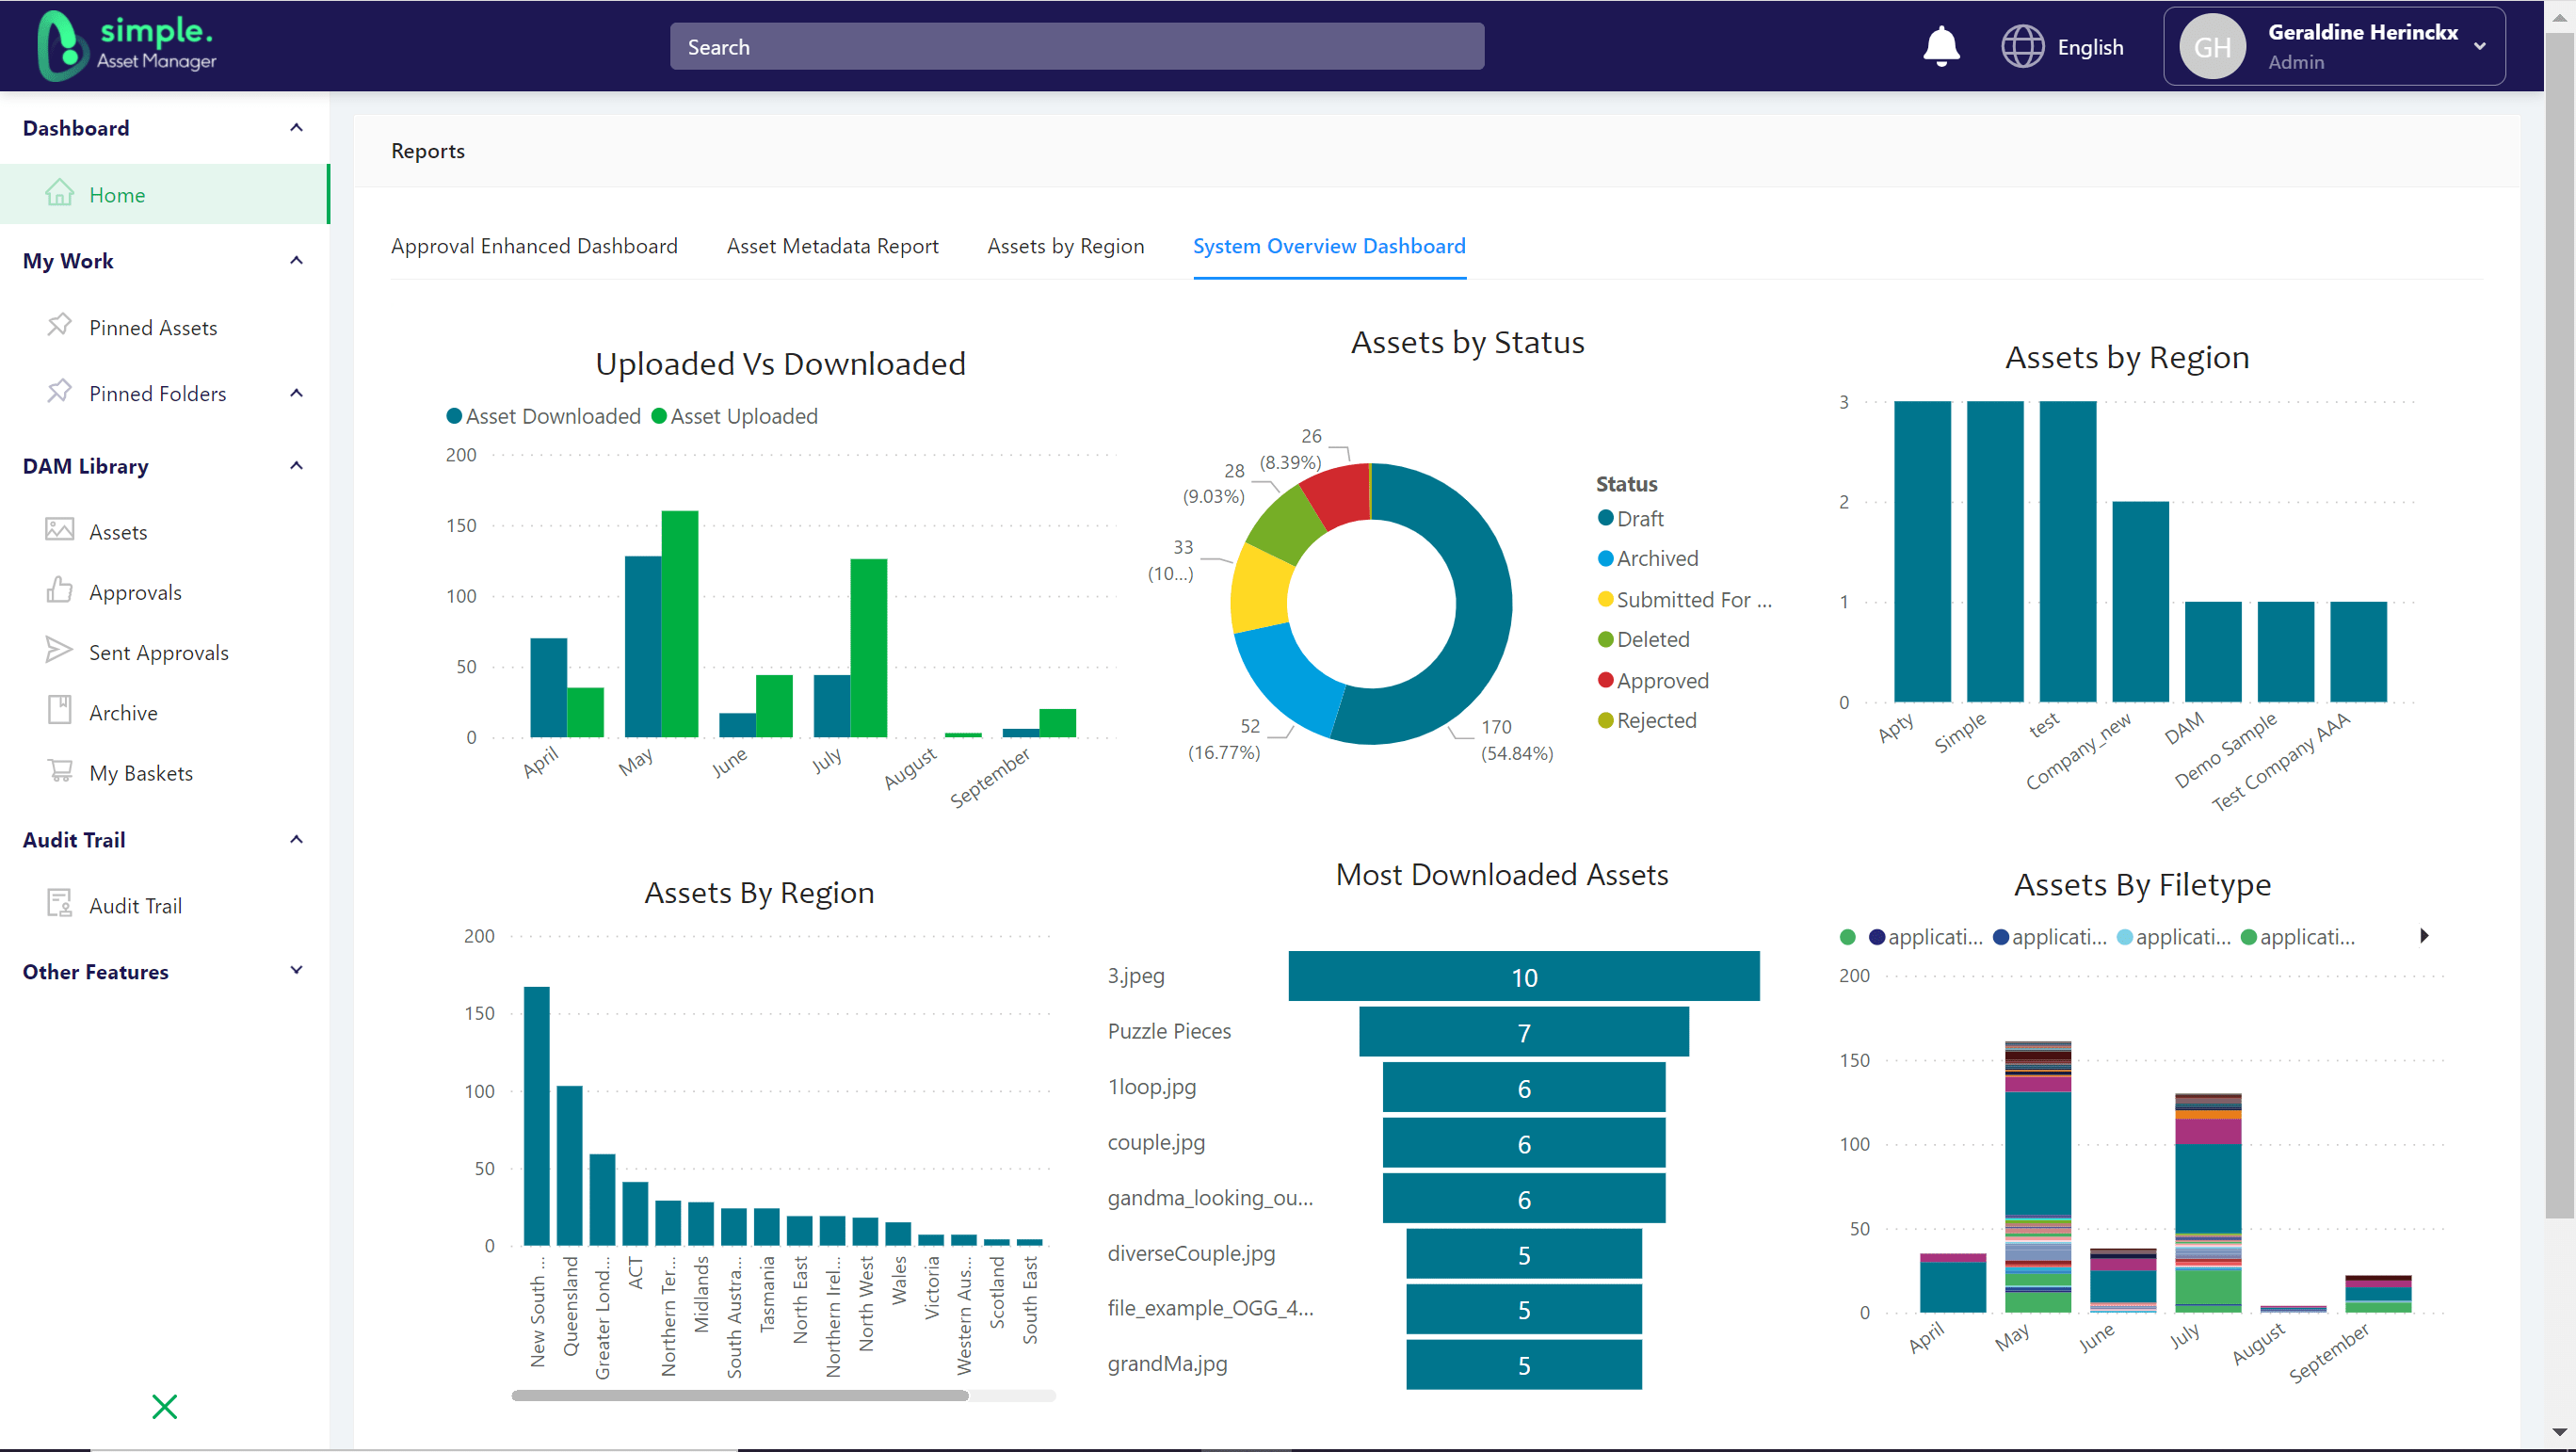 Generate overview report on Uploads & Downloads, Asset status, Assets by region, File types, and most downloaded assets.